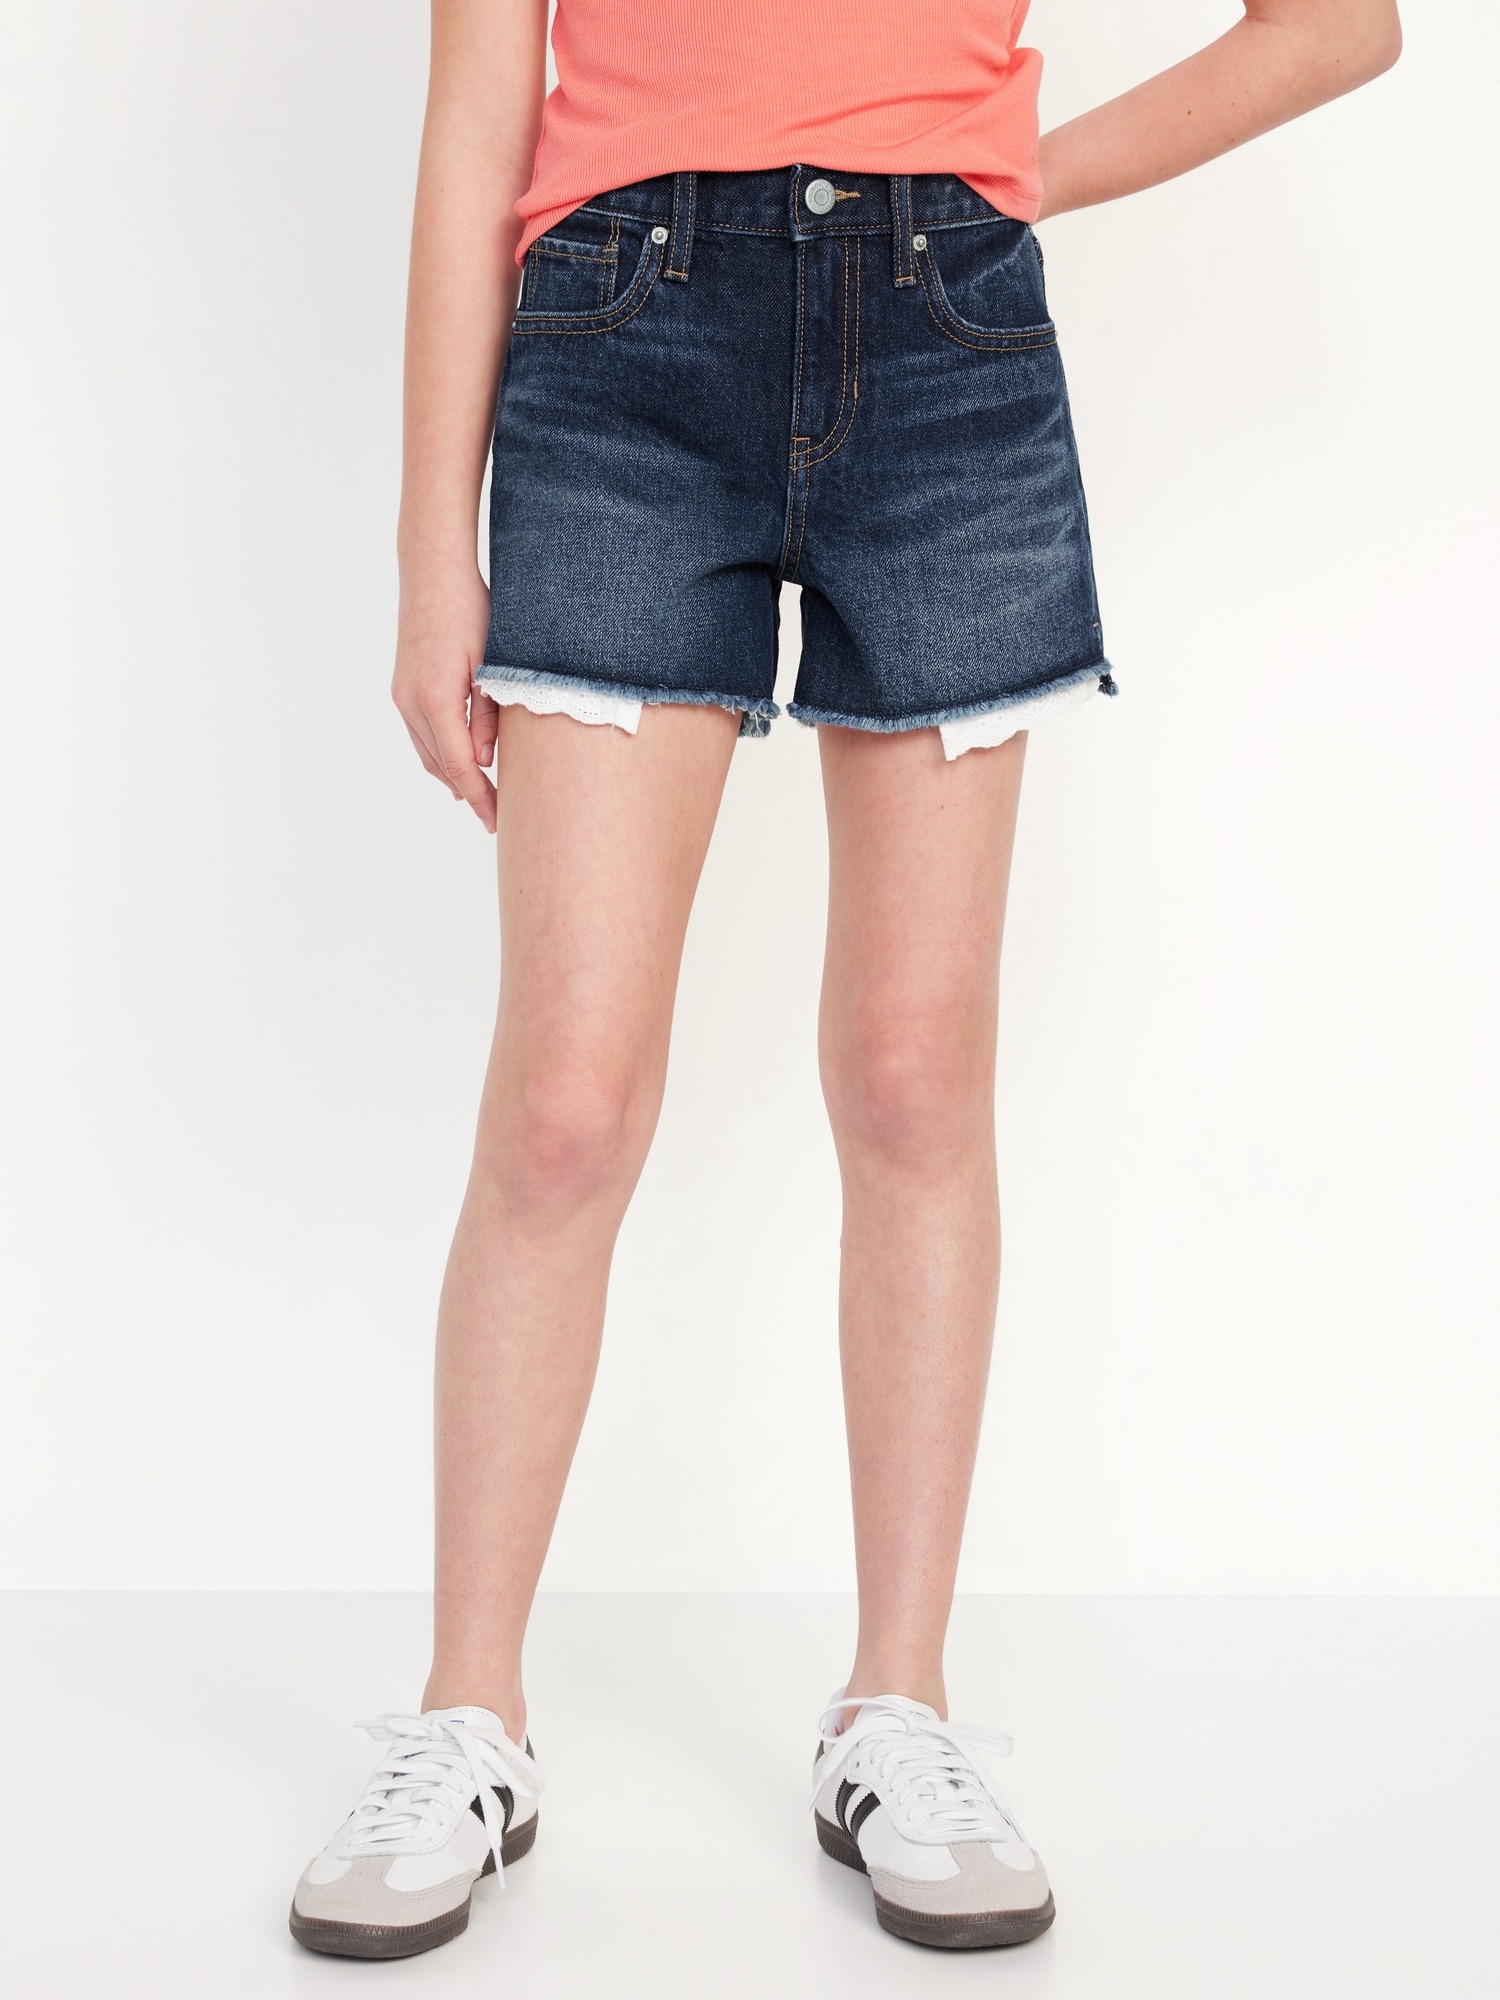 High-Waisted Ripped Jean Shorts for Girls